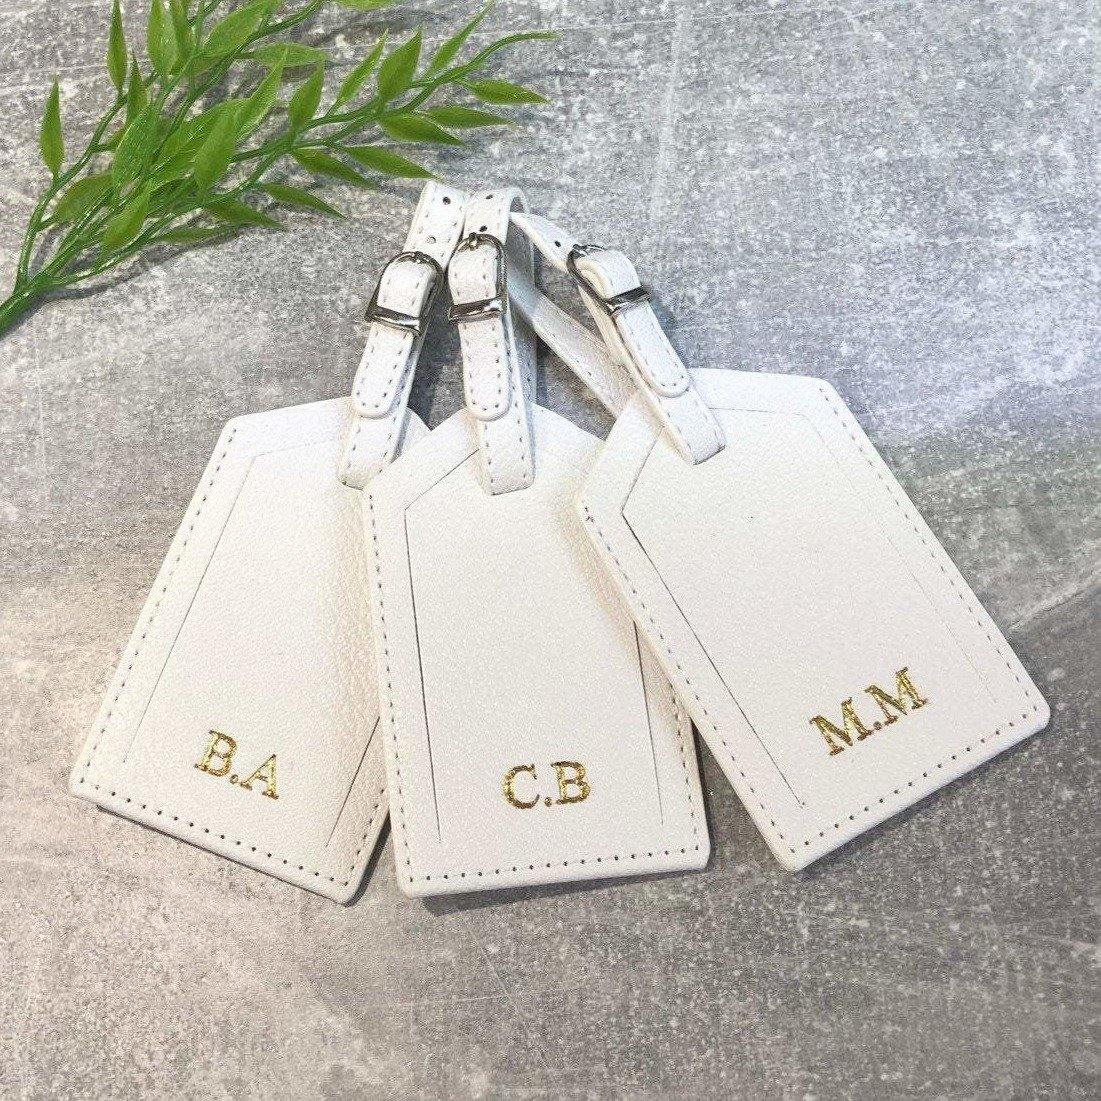 Personalised pu leather luggage tags | wedding gift | travel tags | travel accessories - PersonalisebyLisa